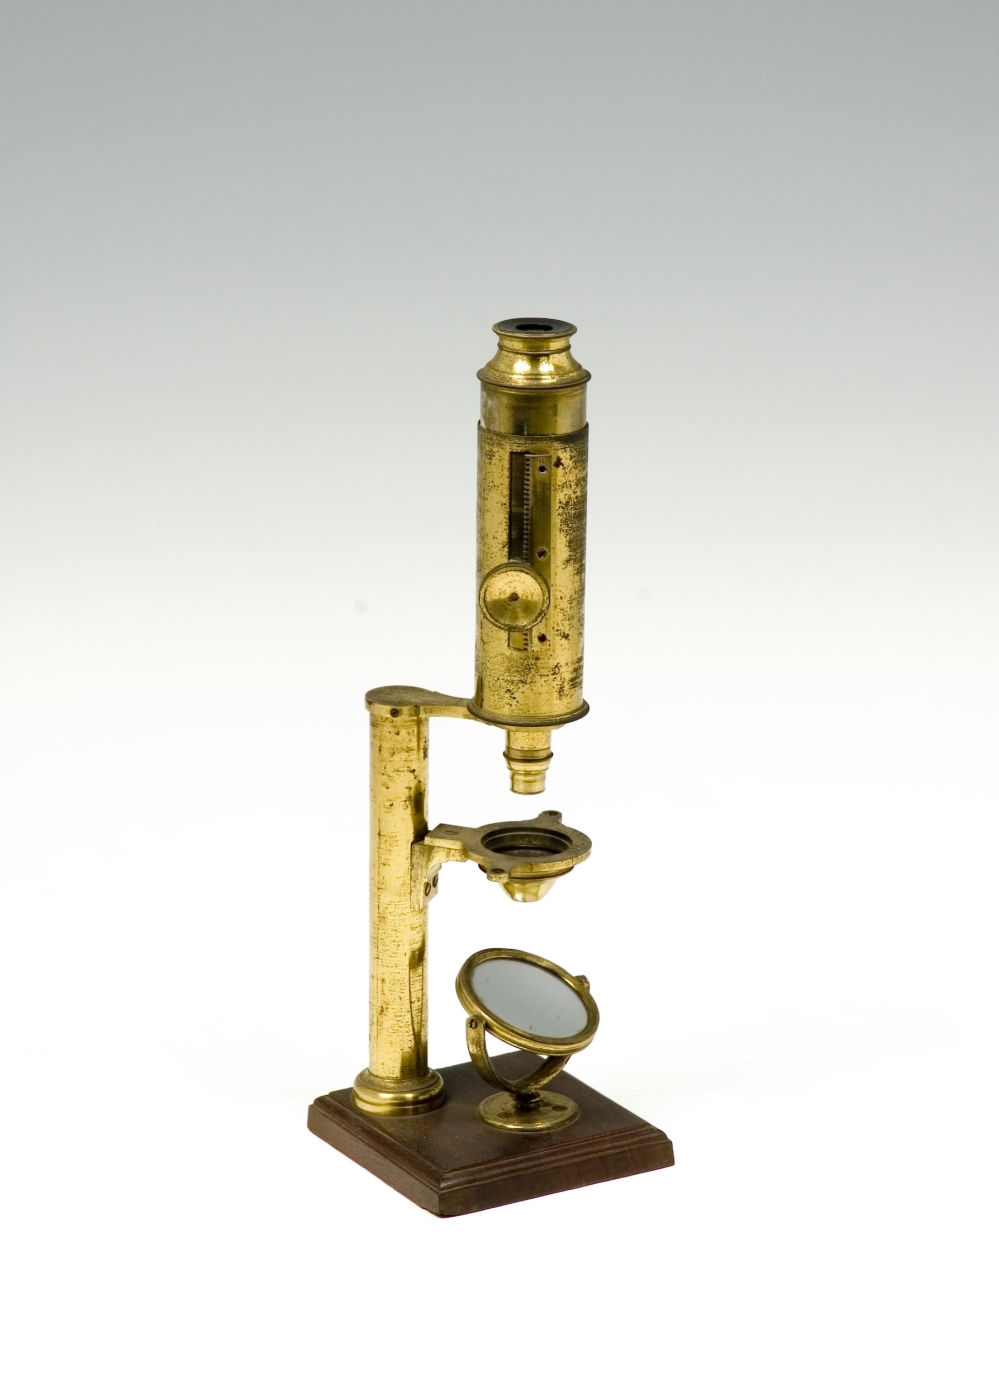 preview image for Cuff Type Microscope with Case and Accessories, Early 19th Century